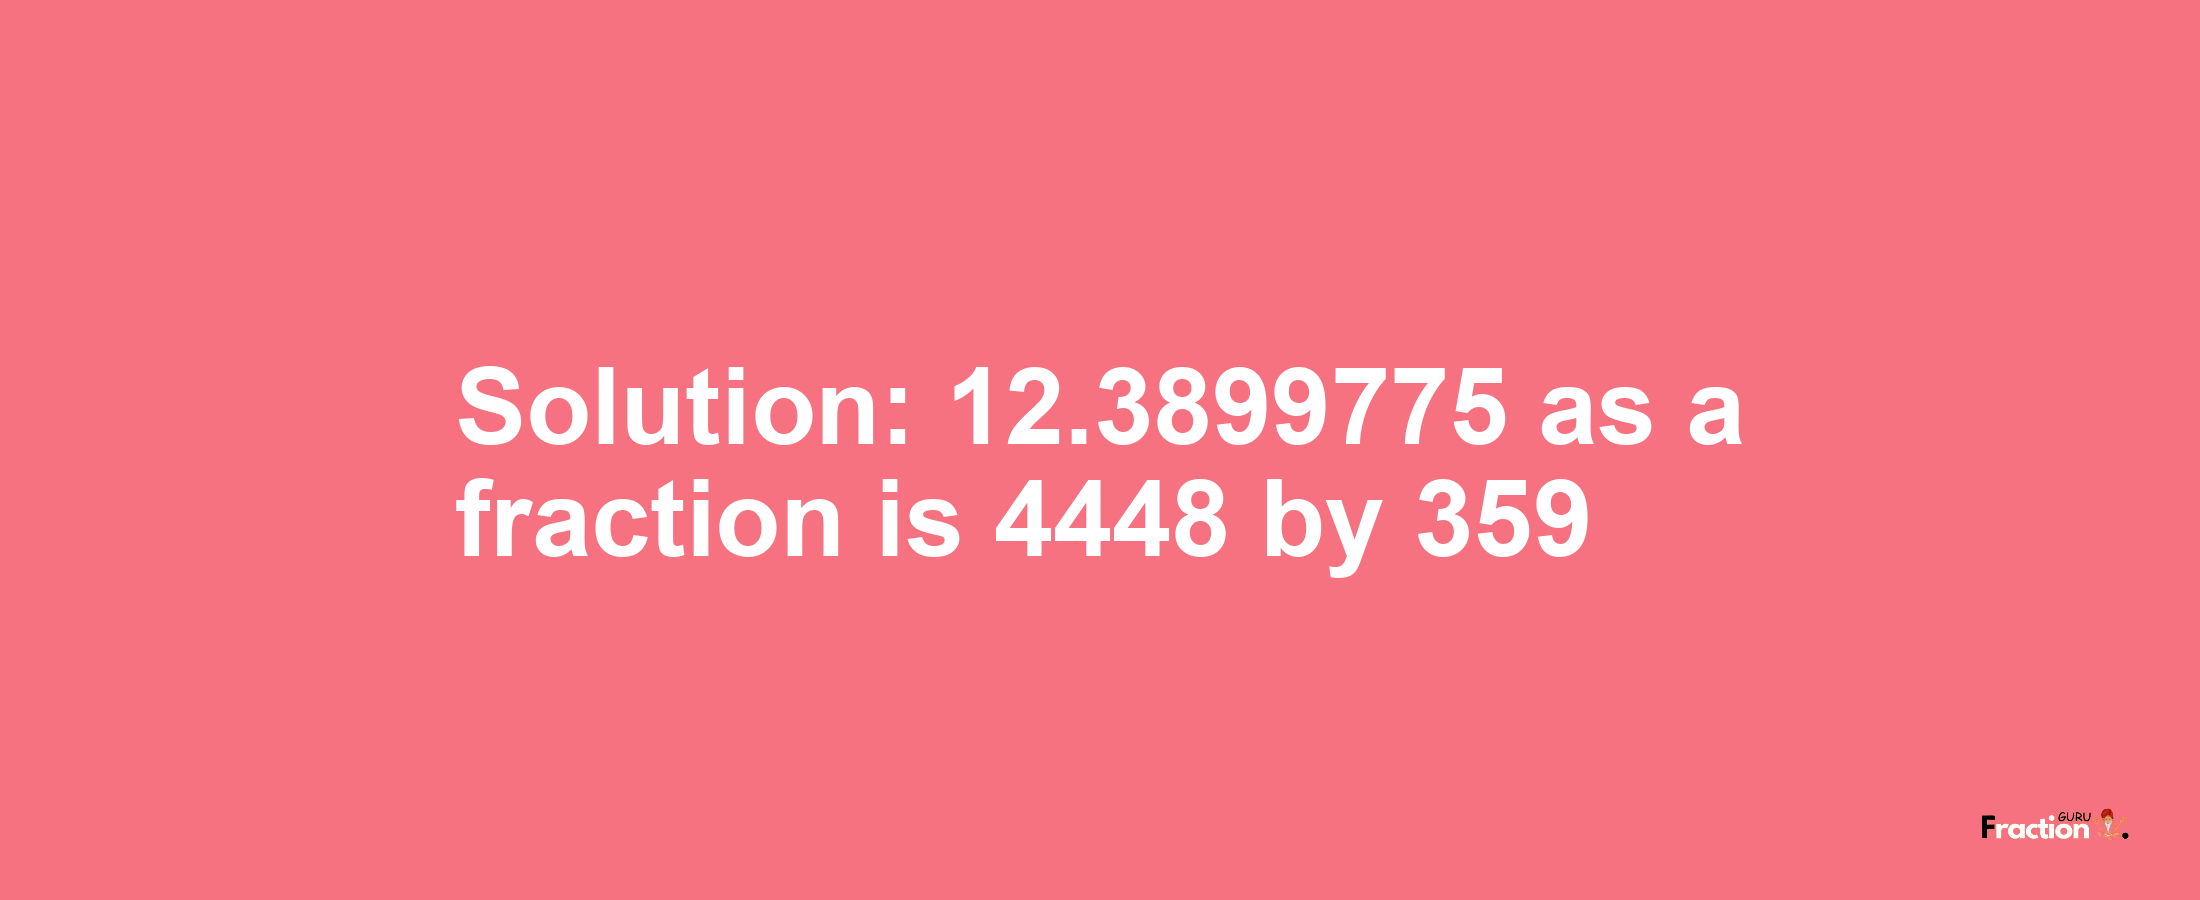 Solution:12.3899775 as a fraction is 4448/359